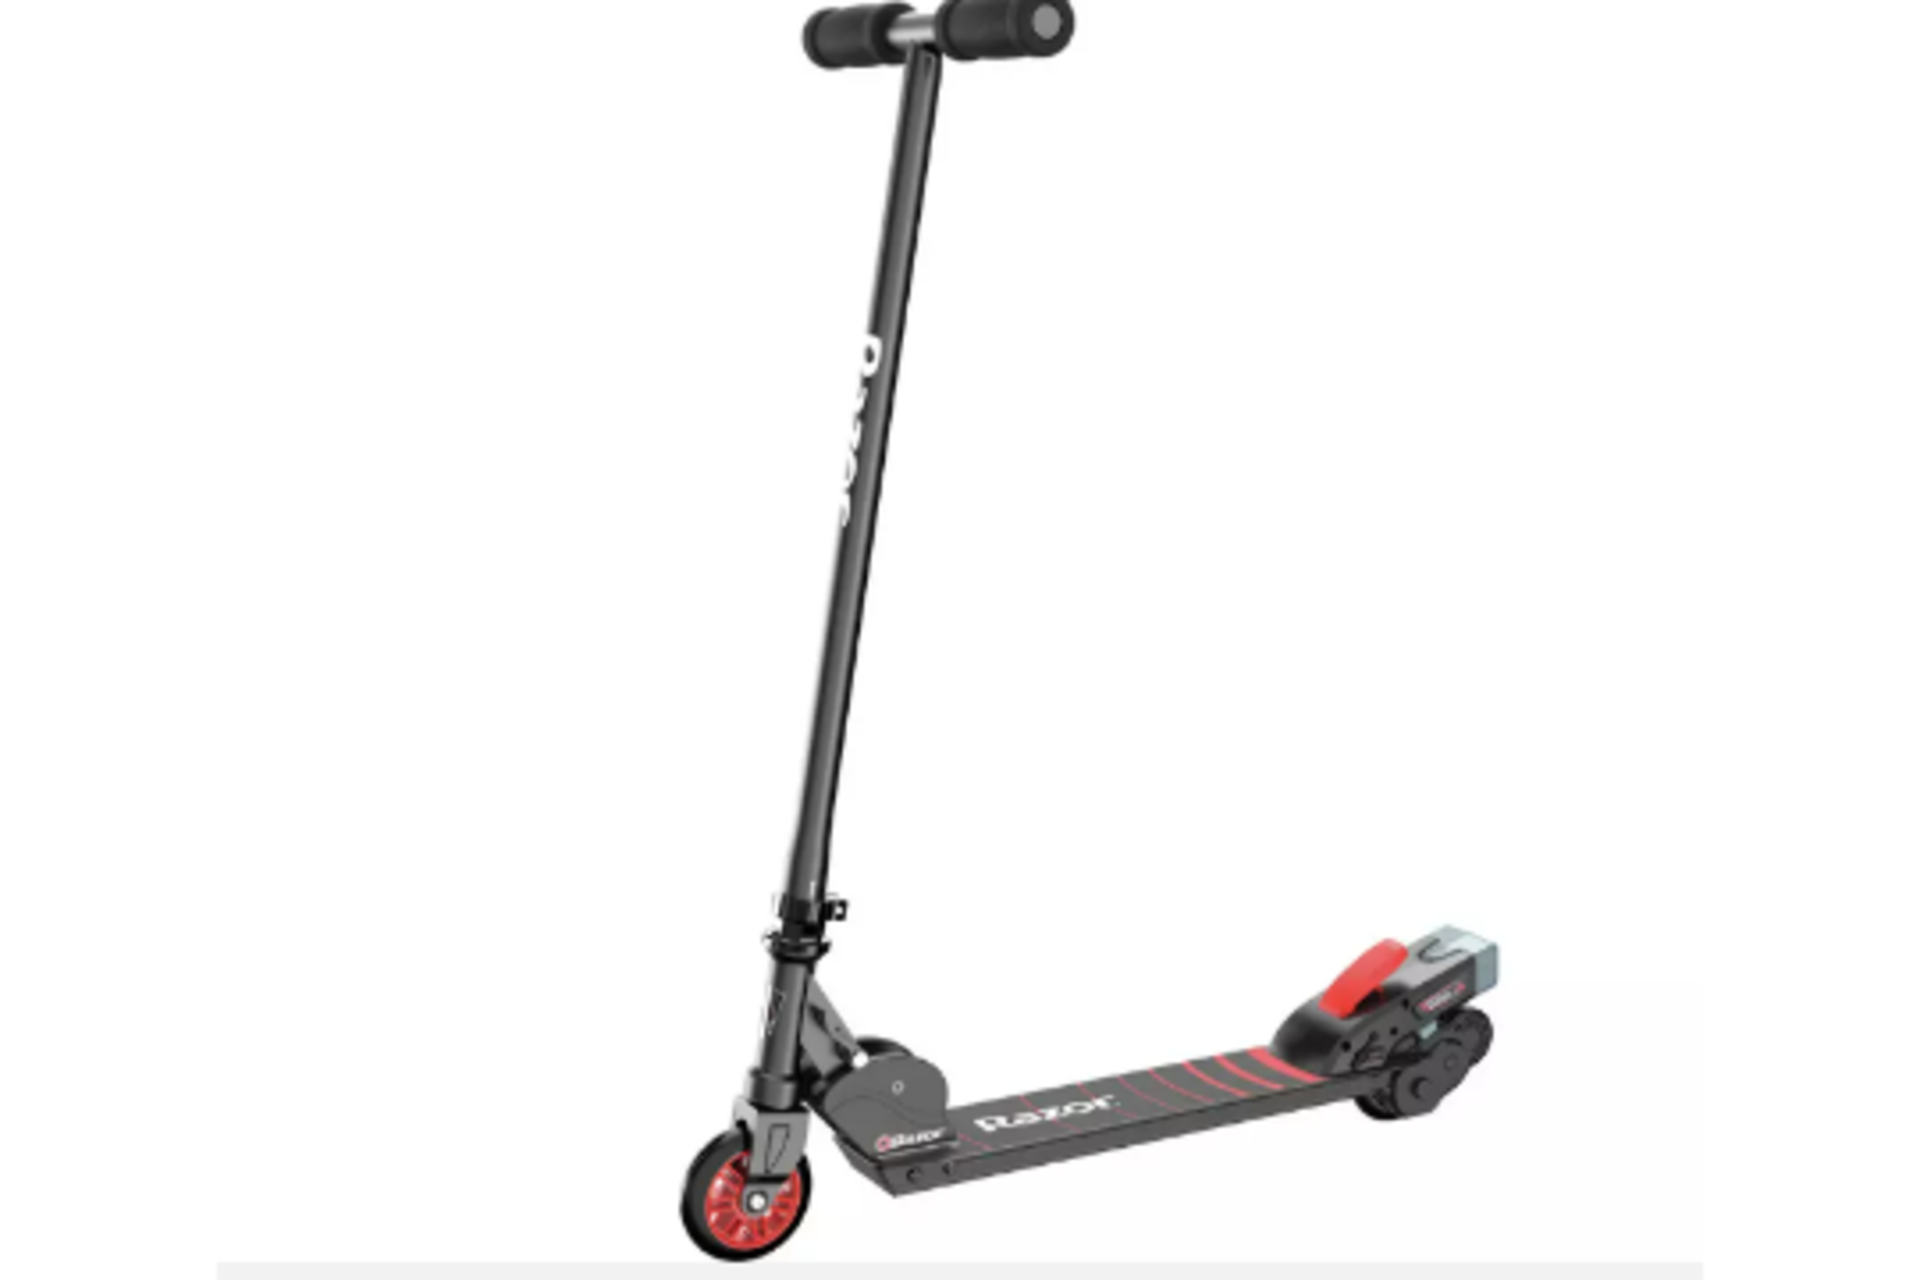 (ex10)Razor Turbo A Black Label Electric Scooter RRP £175.00. Simply step on and kick off to